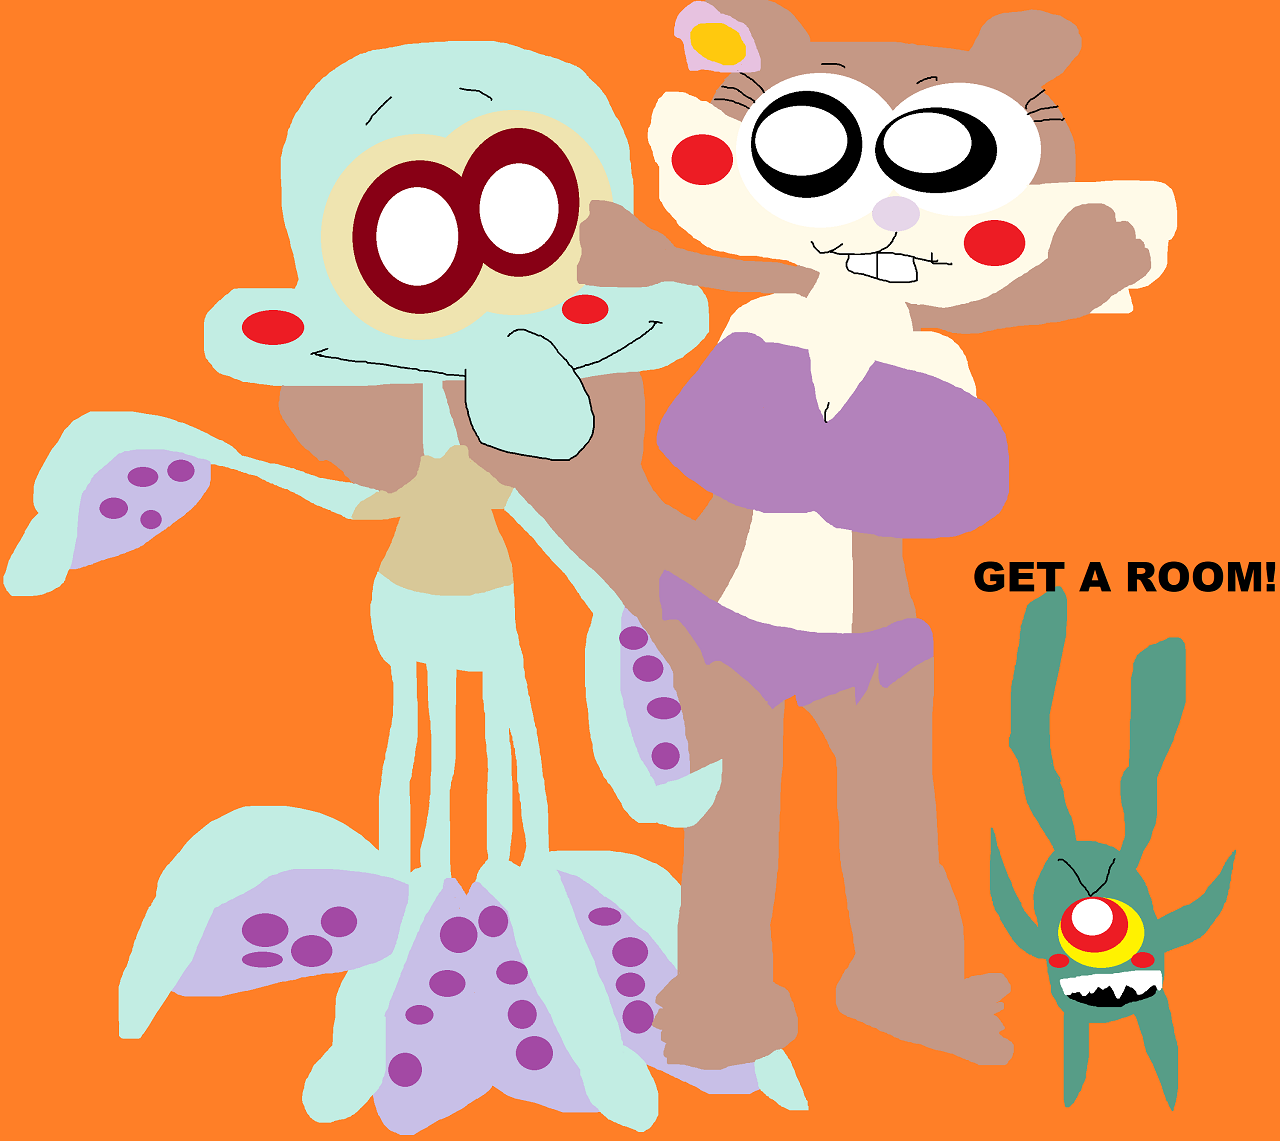 Plankton Yells Get A Room To Squidward And Sandy by Falconlobo